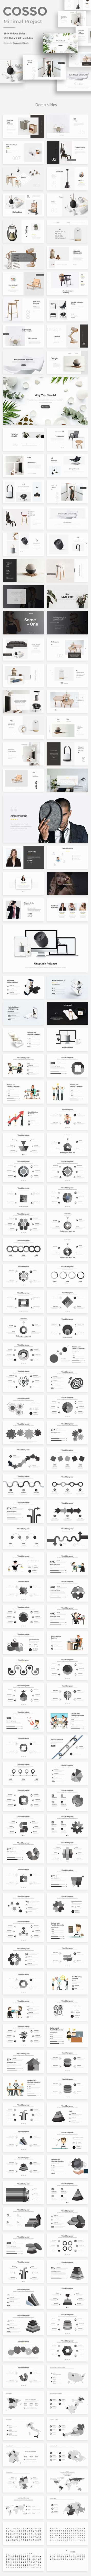 Cosso Minimal Project Keynote Template Keynote Template Typography Unique Presentation Slides Templates